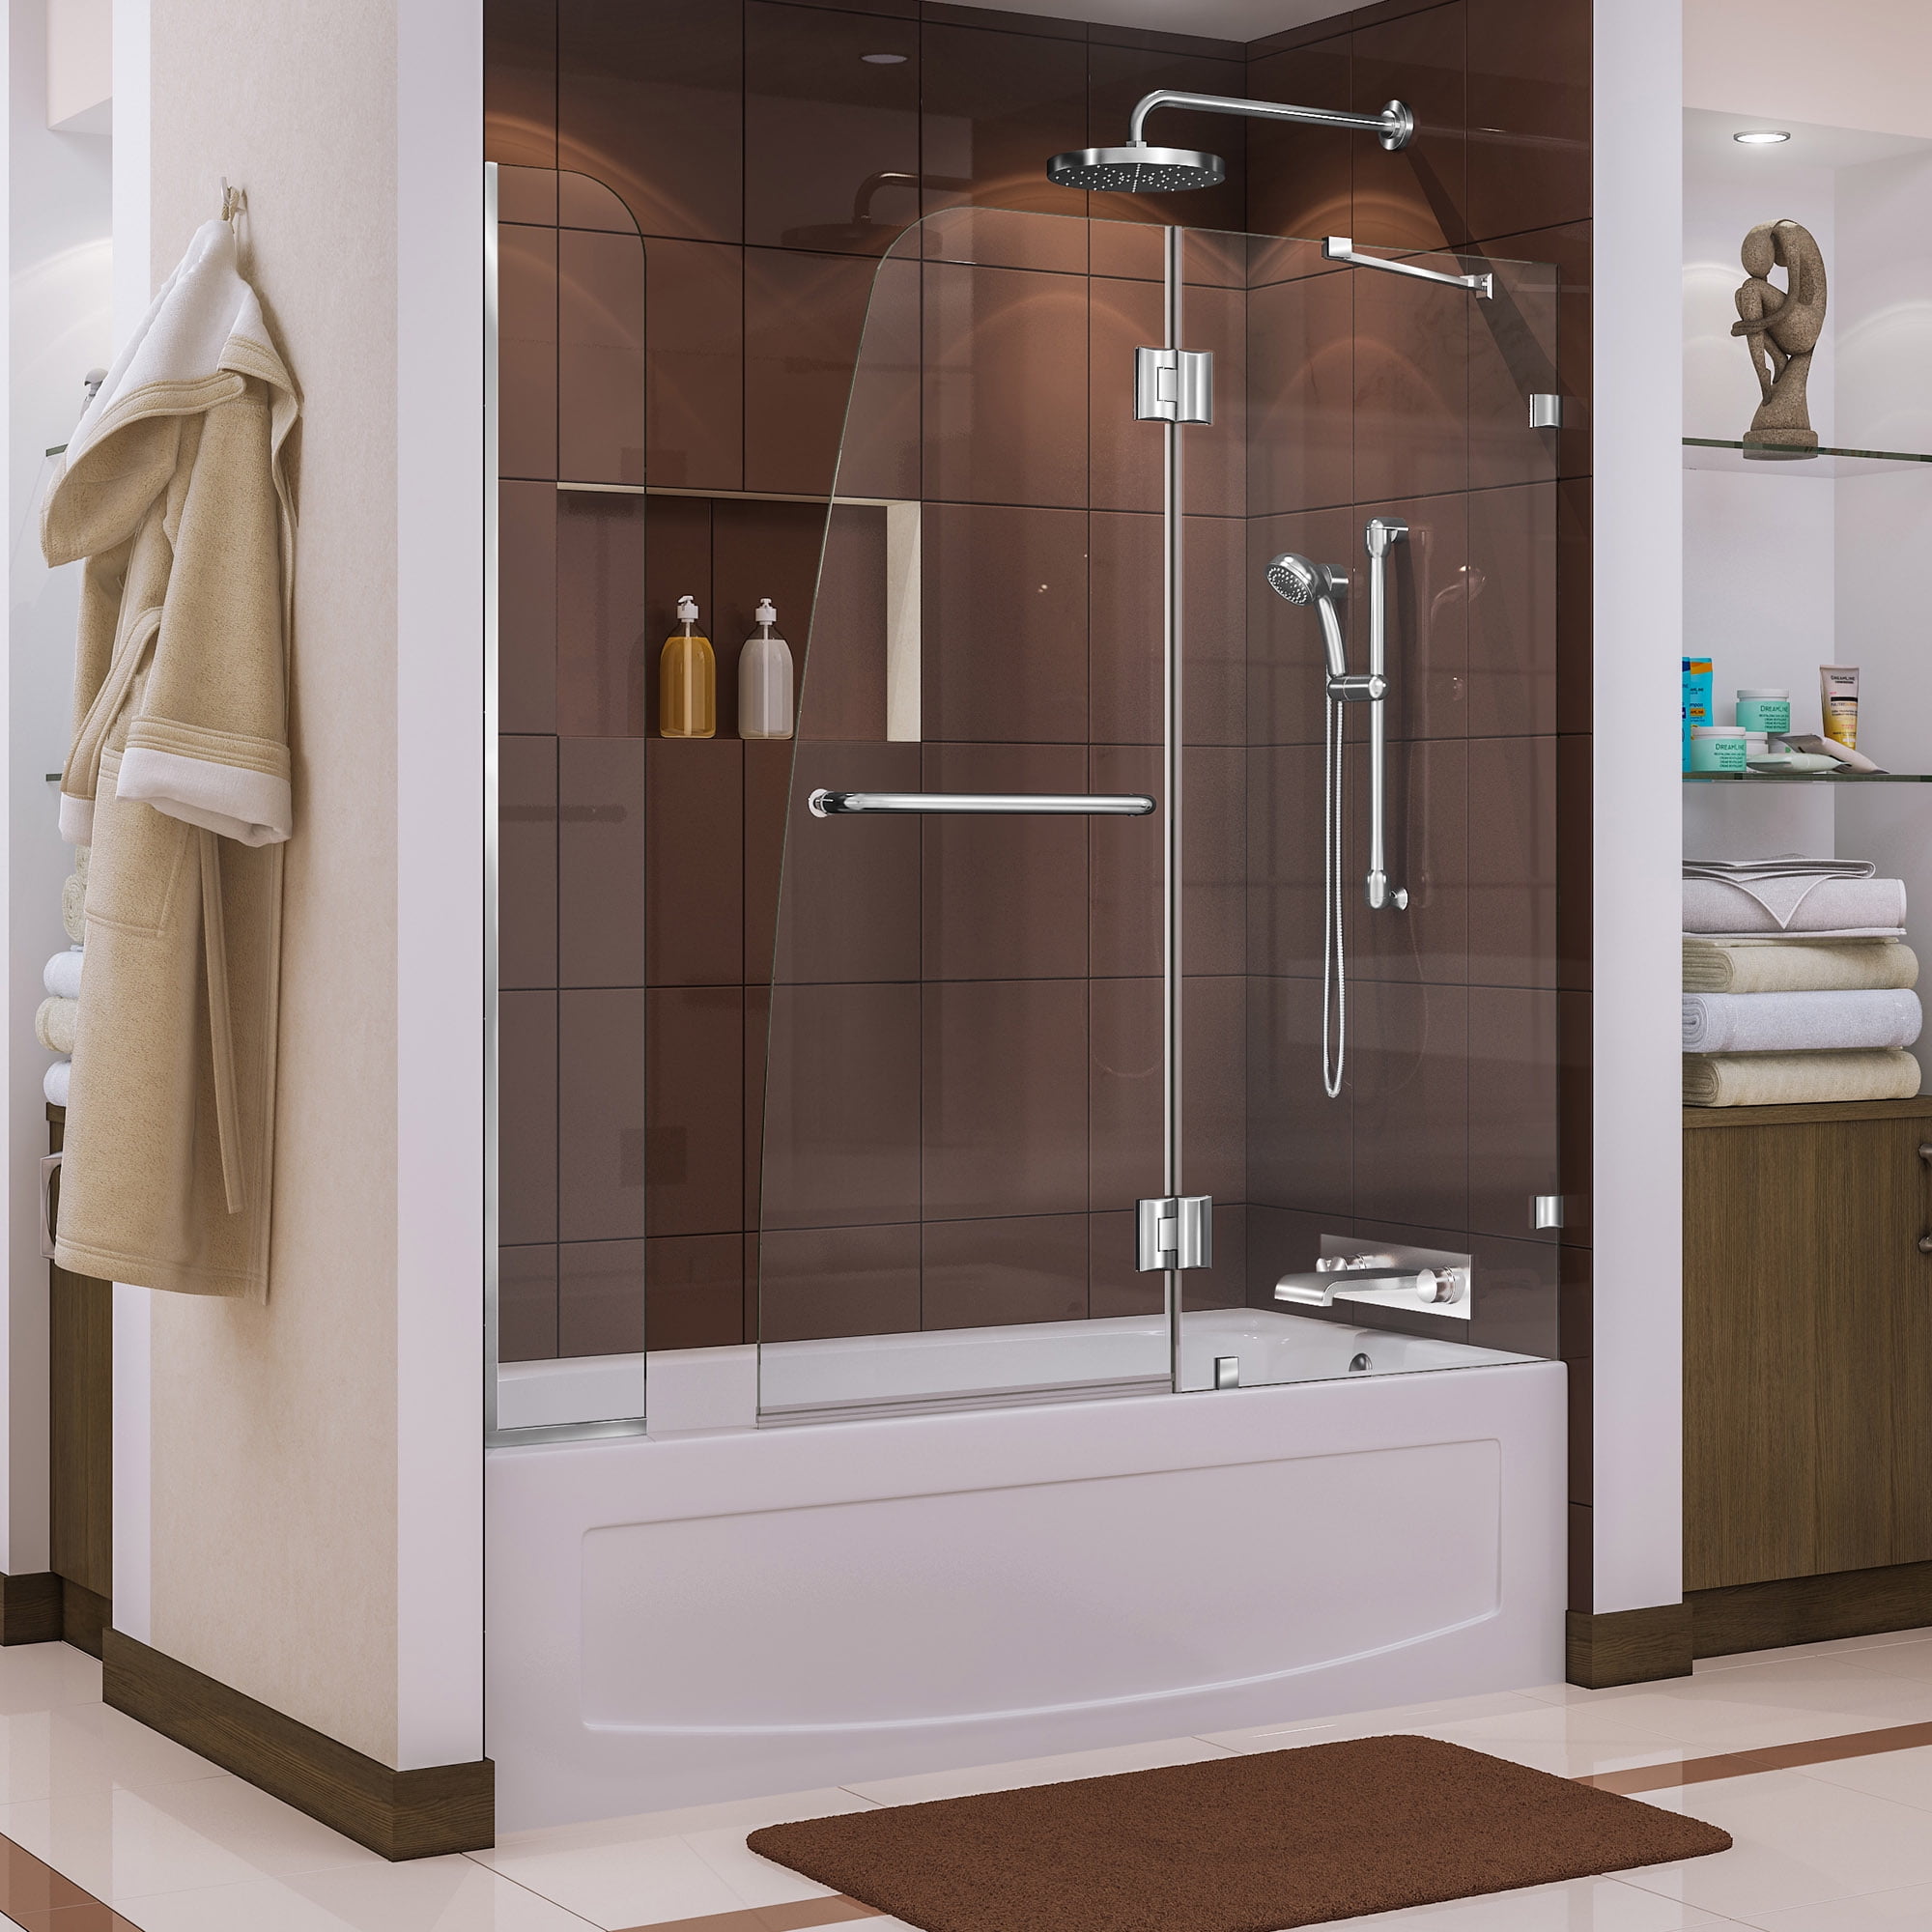 DreamLine Aqua Lux 56-60 in. W x 58 in. H Frameless Hinged Tub Door with Extender Panel in Chrome